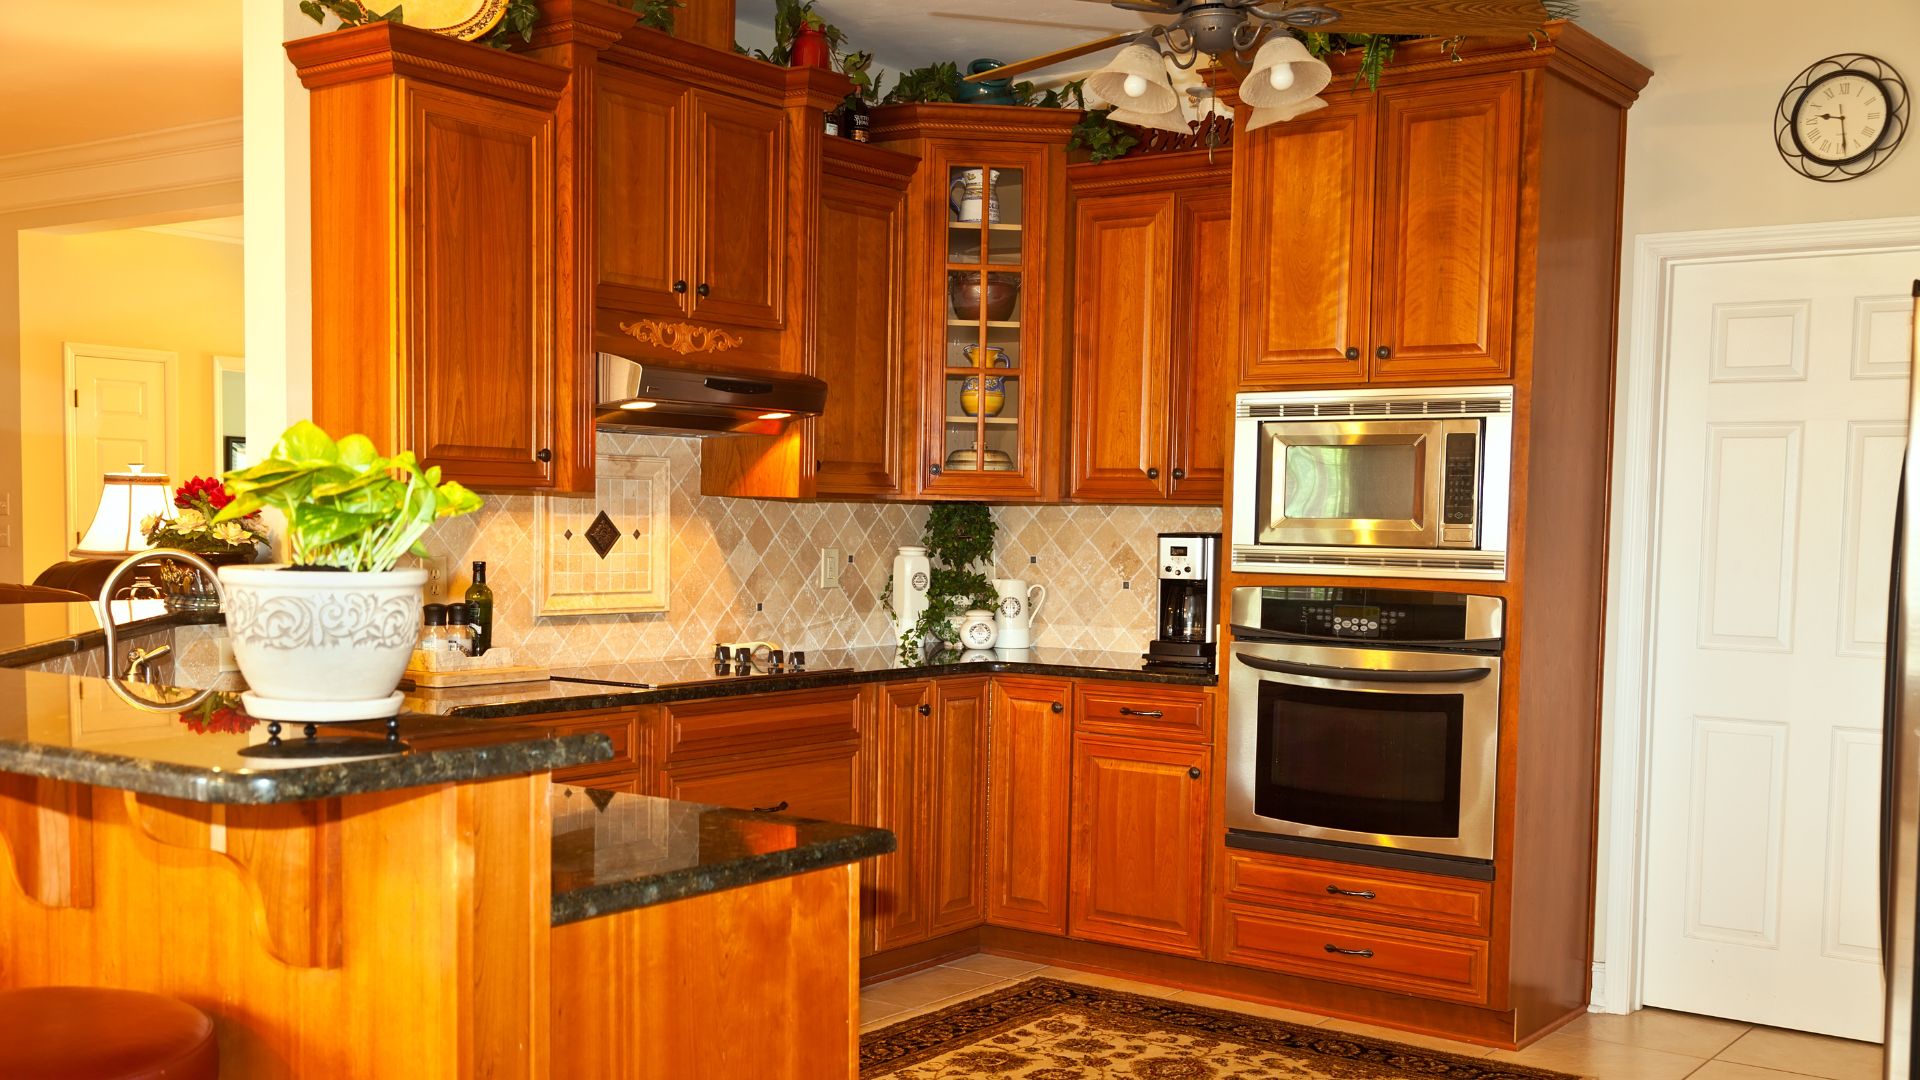 Traditional kitchen style in maple cabinet and granite countertop